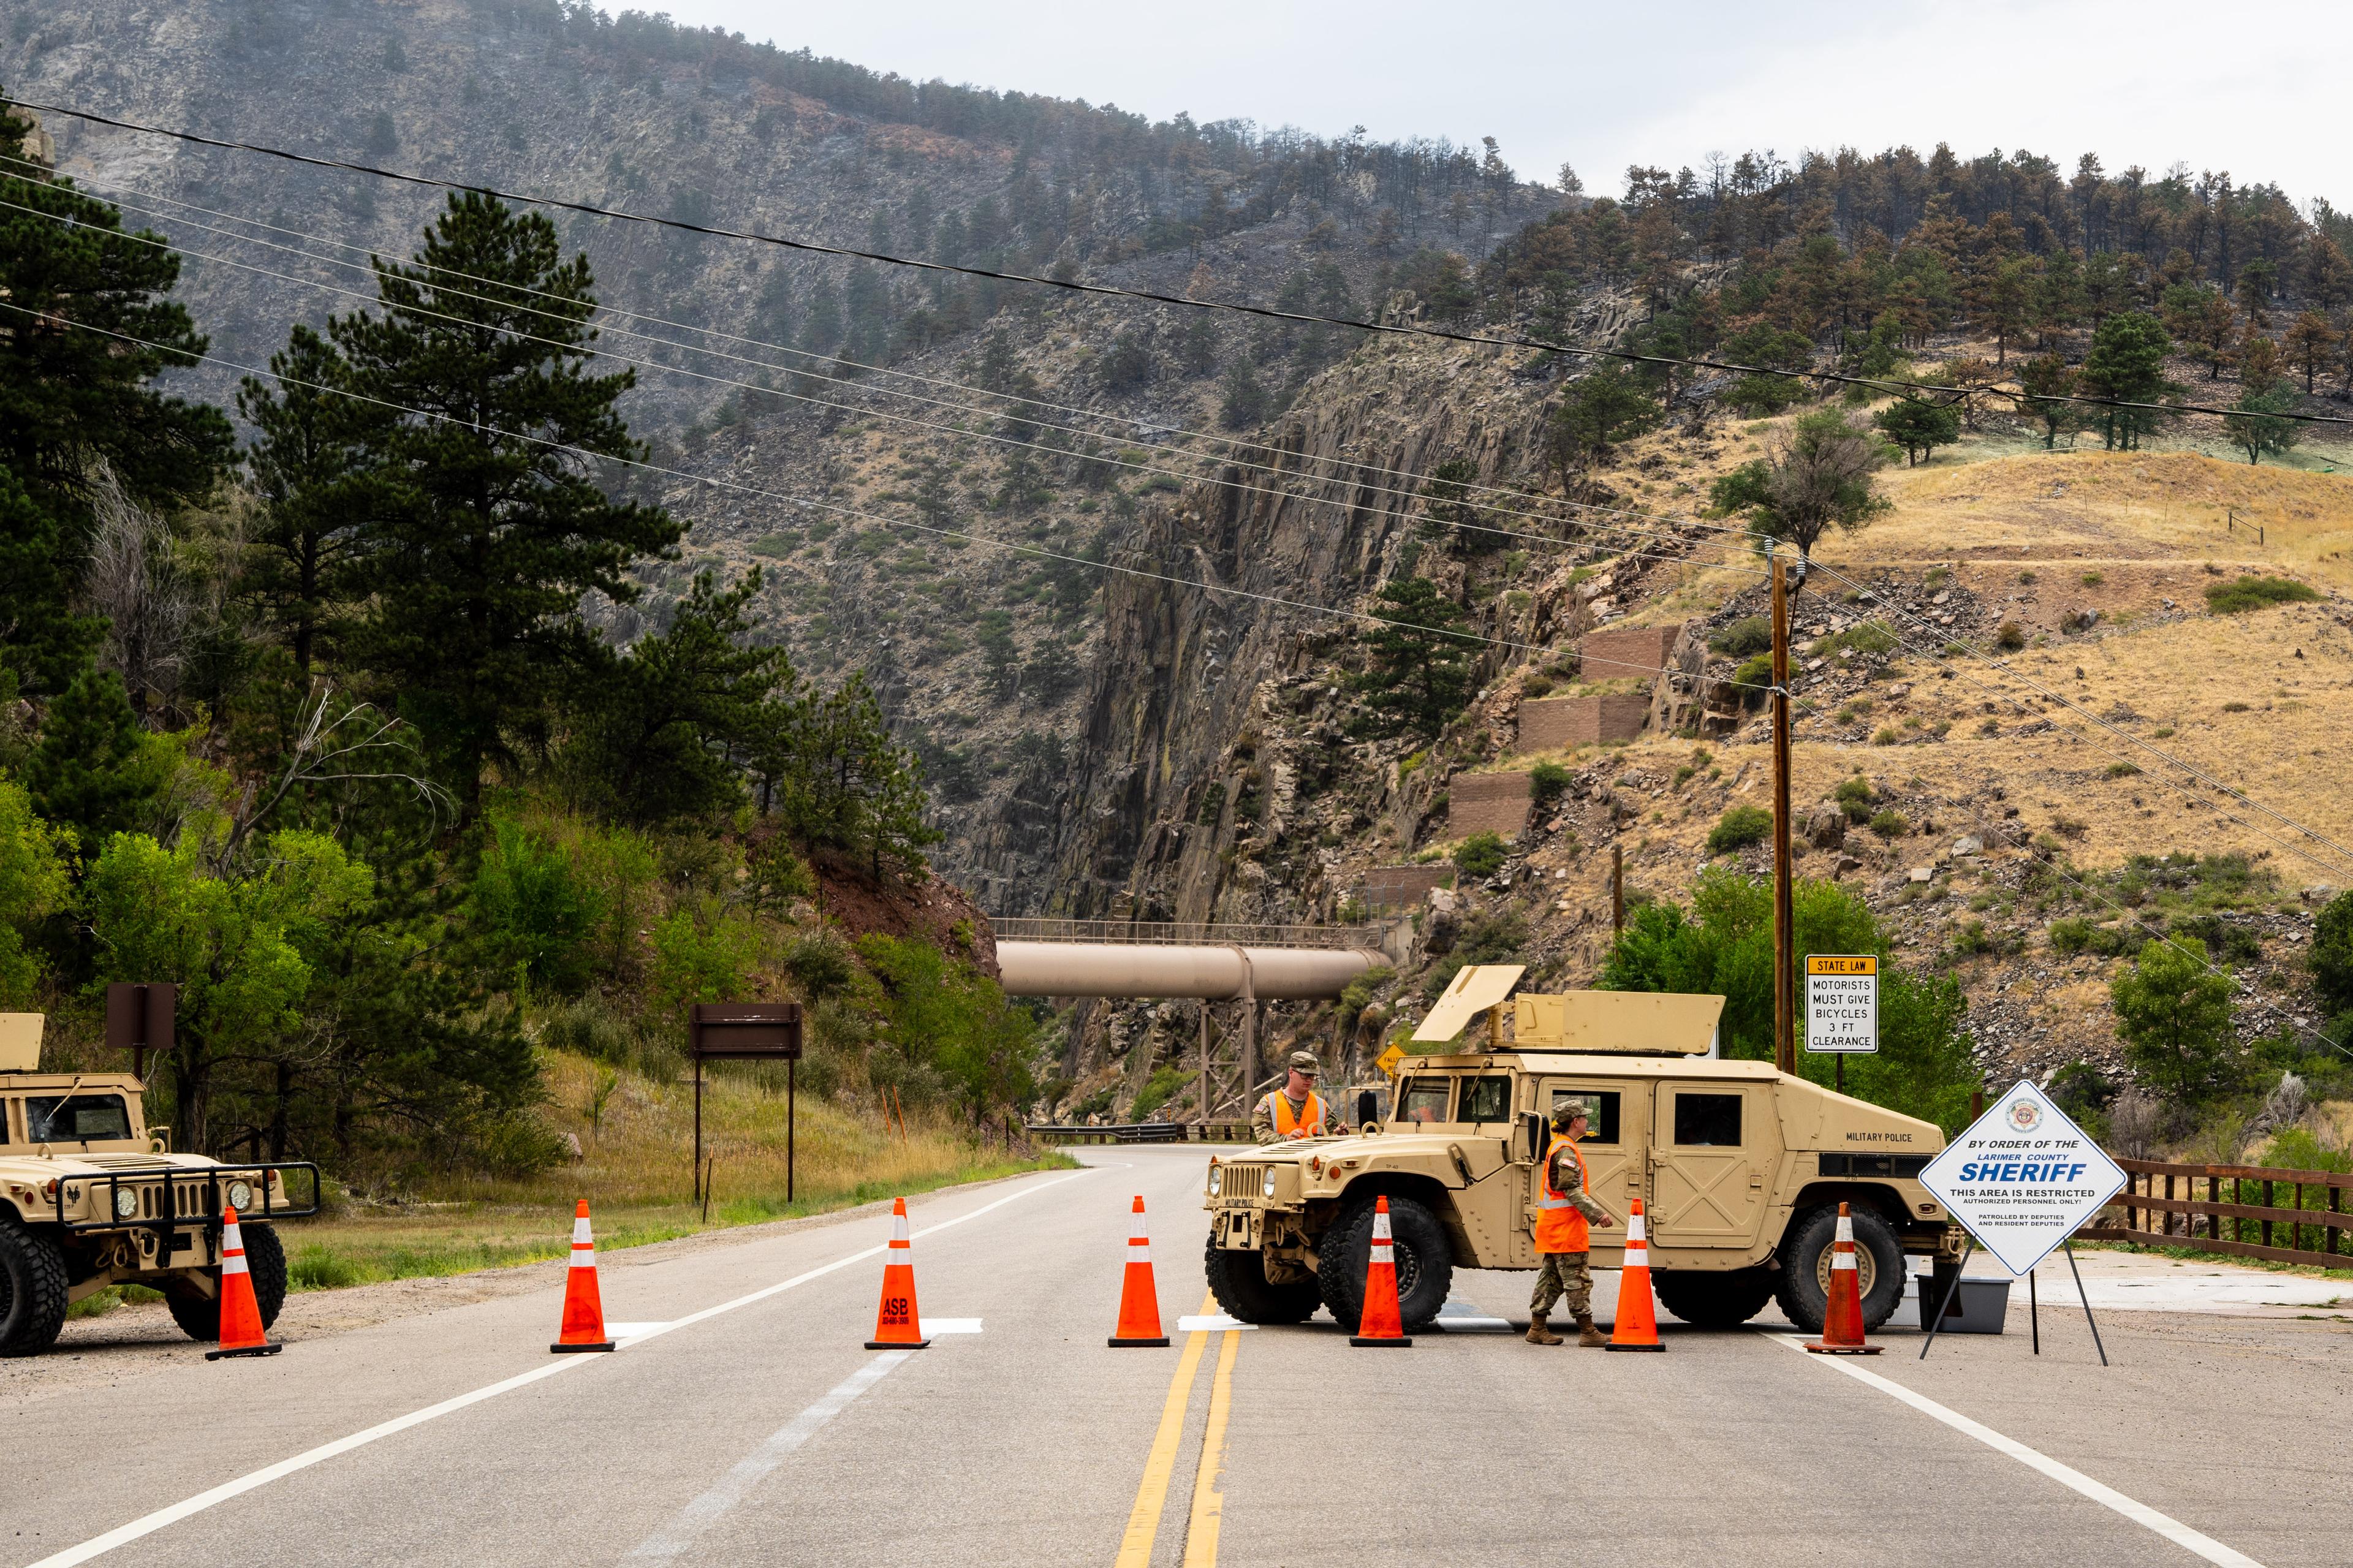 National guard troops block a road near a wildfire with a humvee and orange cones.